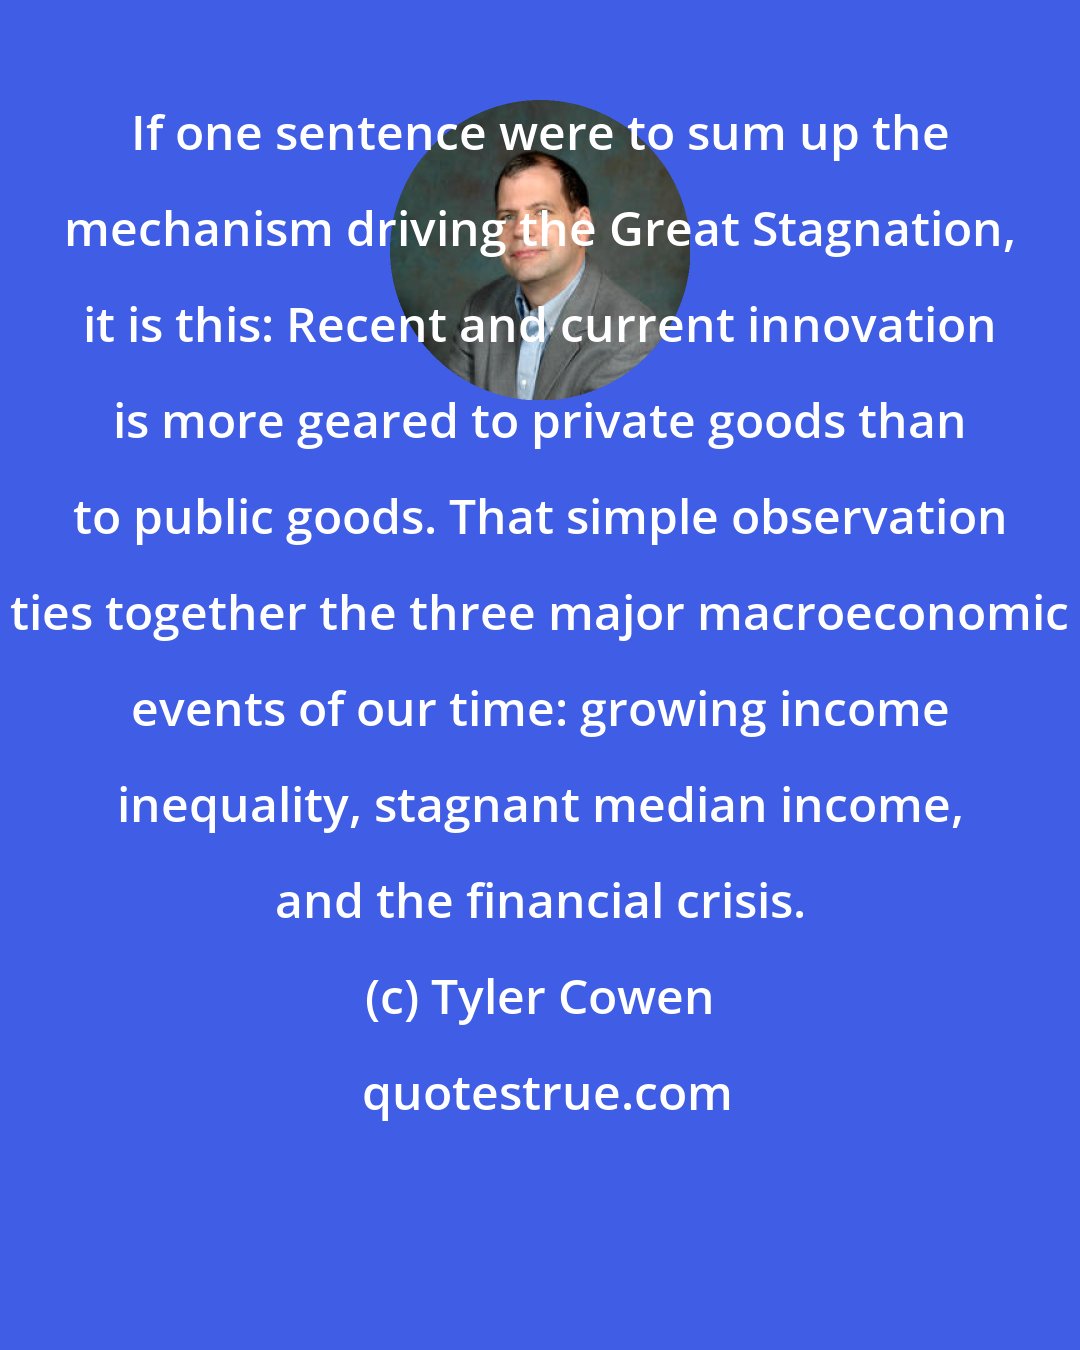 Tyler Cowen: If one sentence were to sum up the mechanism driving the Great Stagnation, it is this: Recent and current innovation is more geared to private goods than to public goods. That simple observation ties together the three major macroeconomic events of our time: growing income inequality, stagnant median income, and the financial crisis.